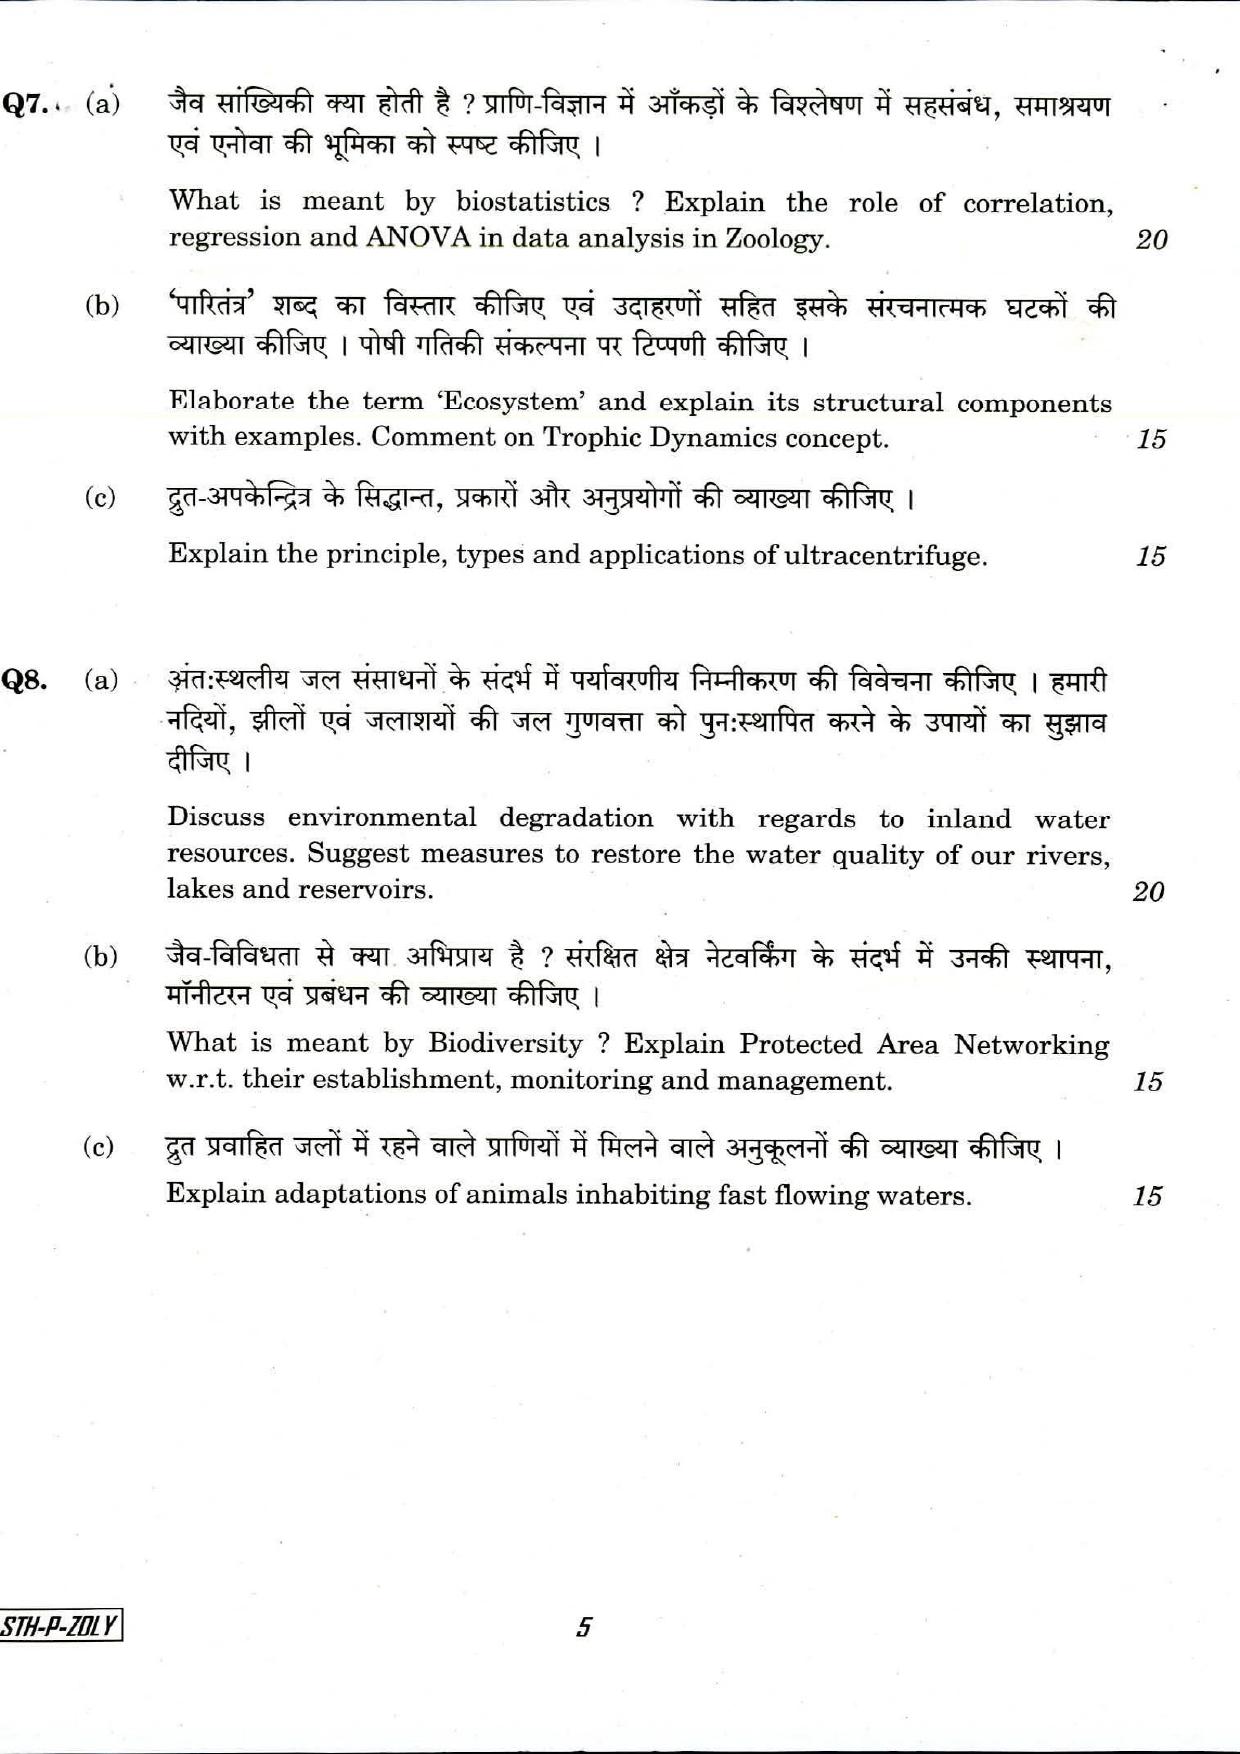 VCRC Technician Previous Papers: Zoology - Page 5